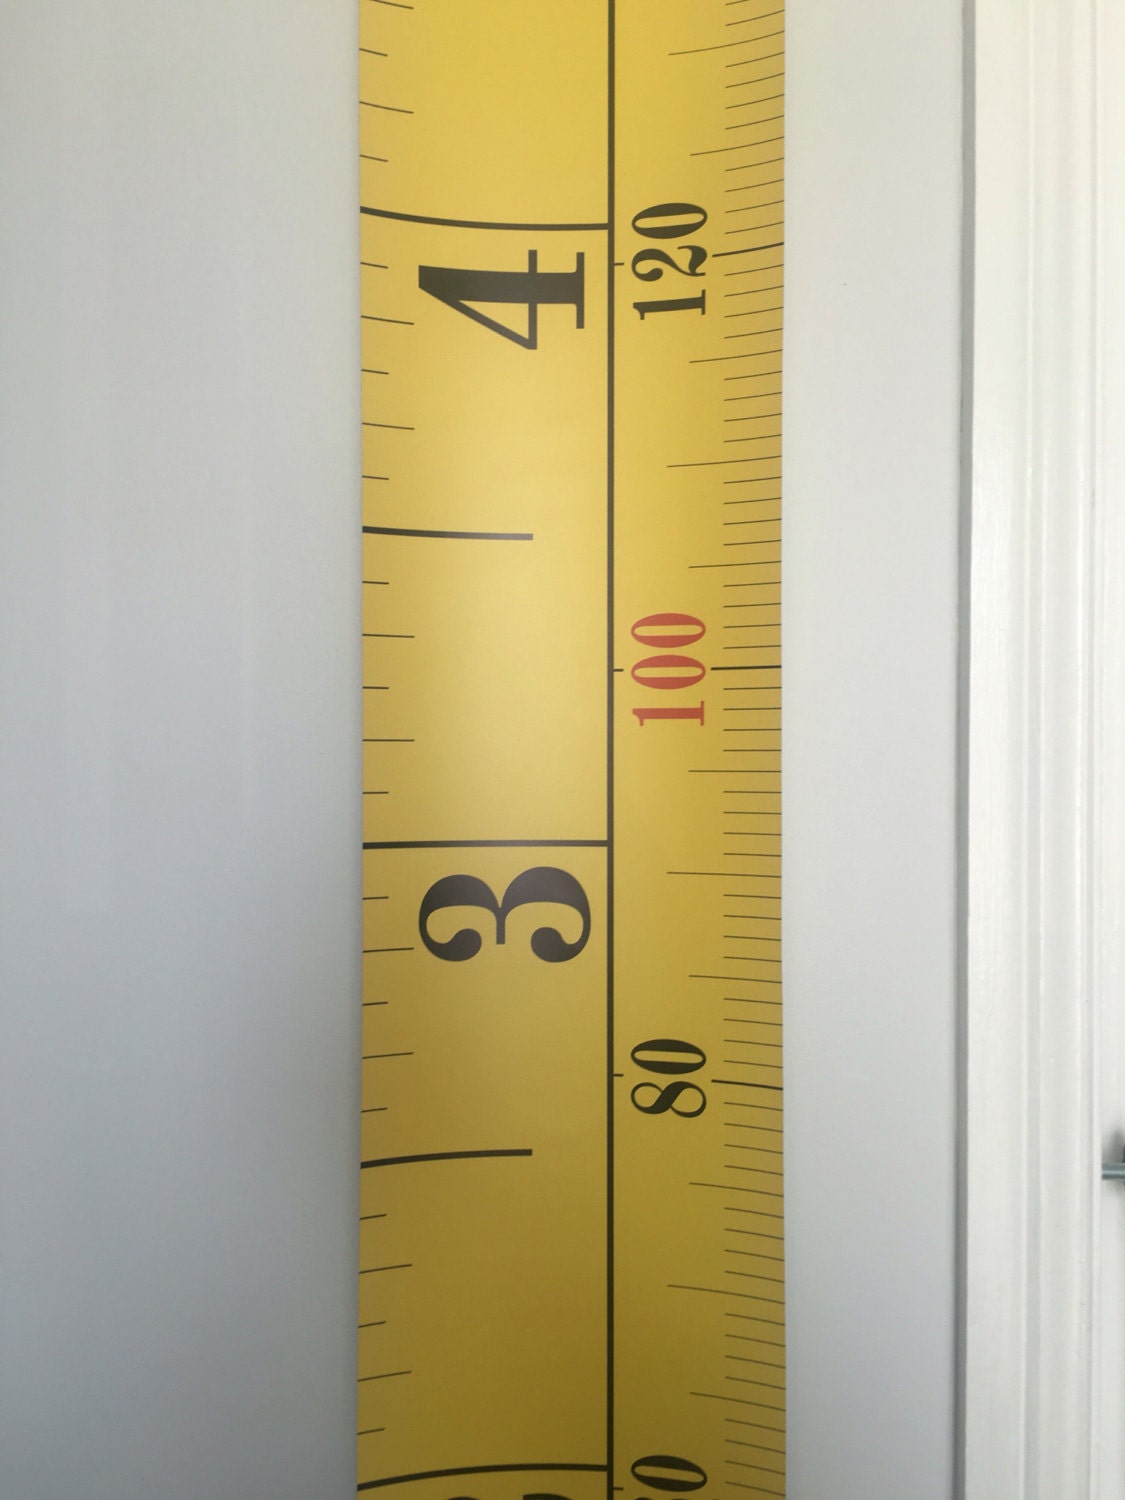 Imperial To Metric Height Chart